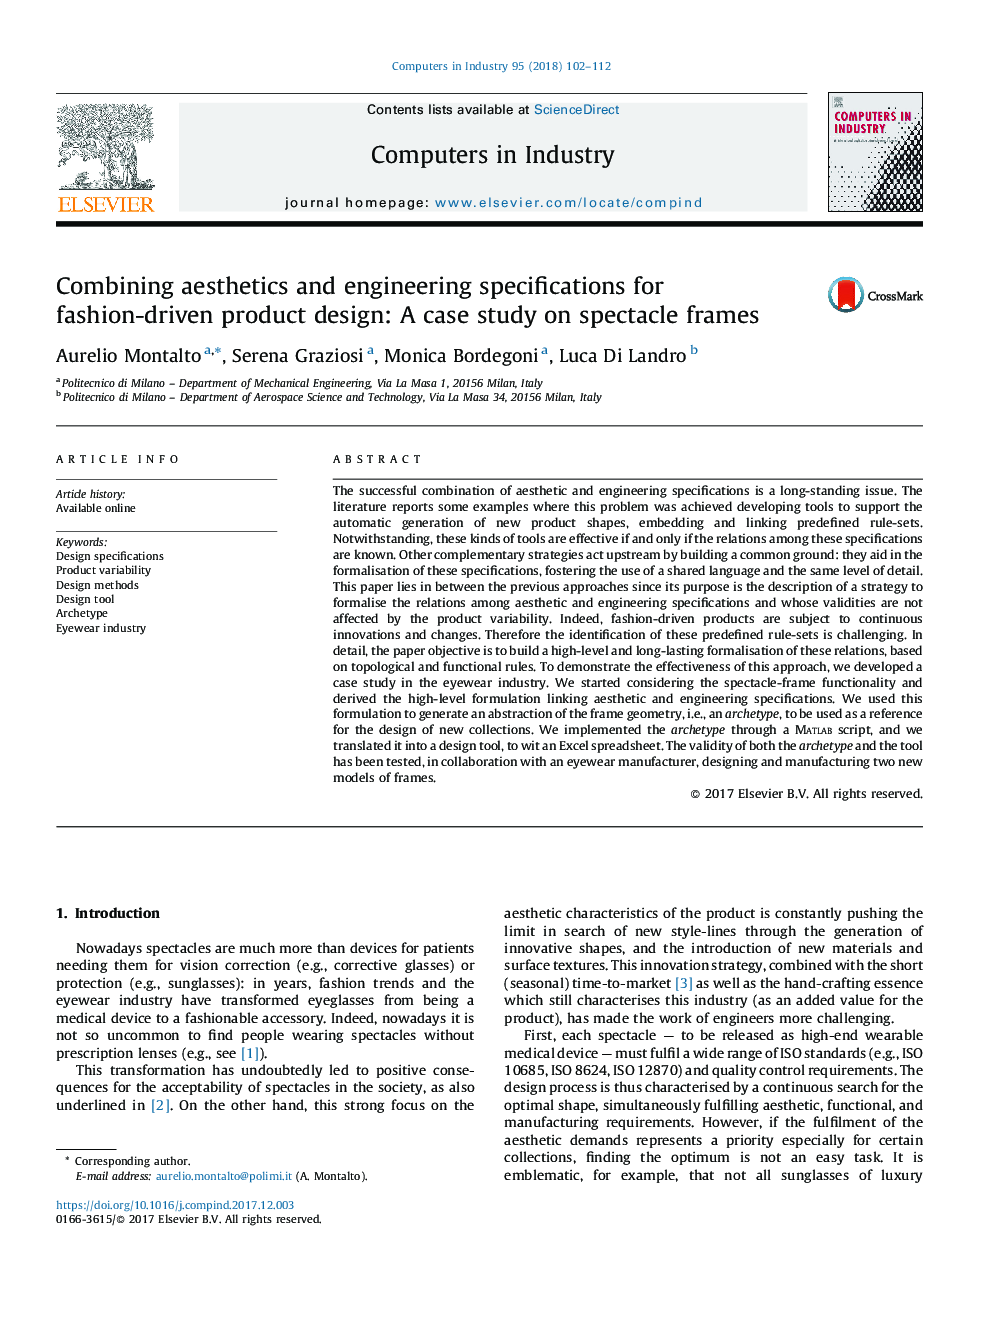 Combining aesthetics and engineering specifications for fashion-driven product design: A case study on spectacle frames